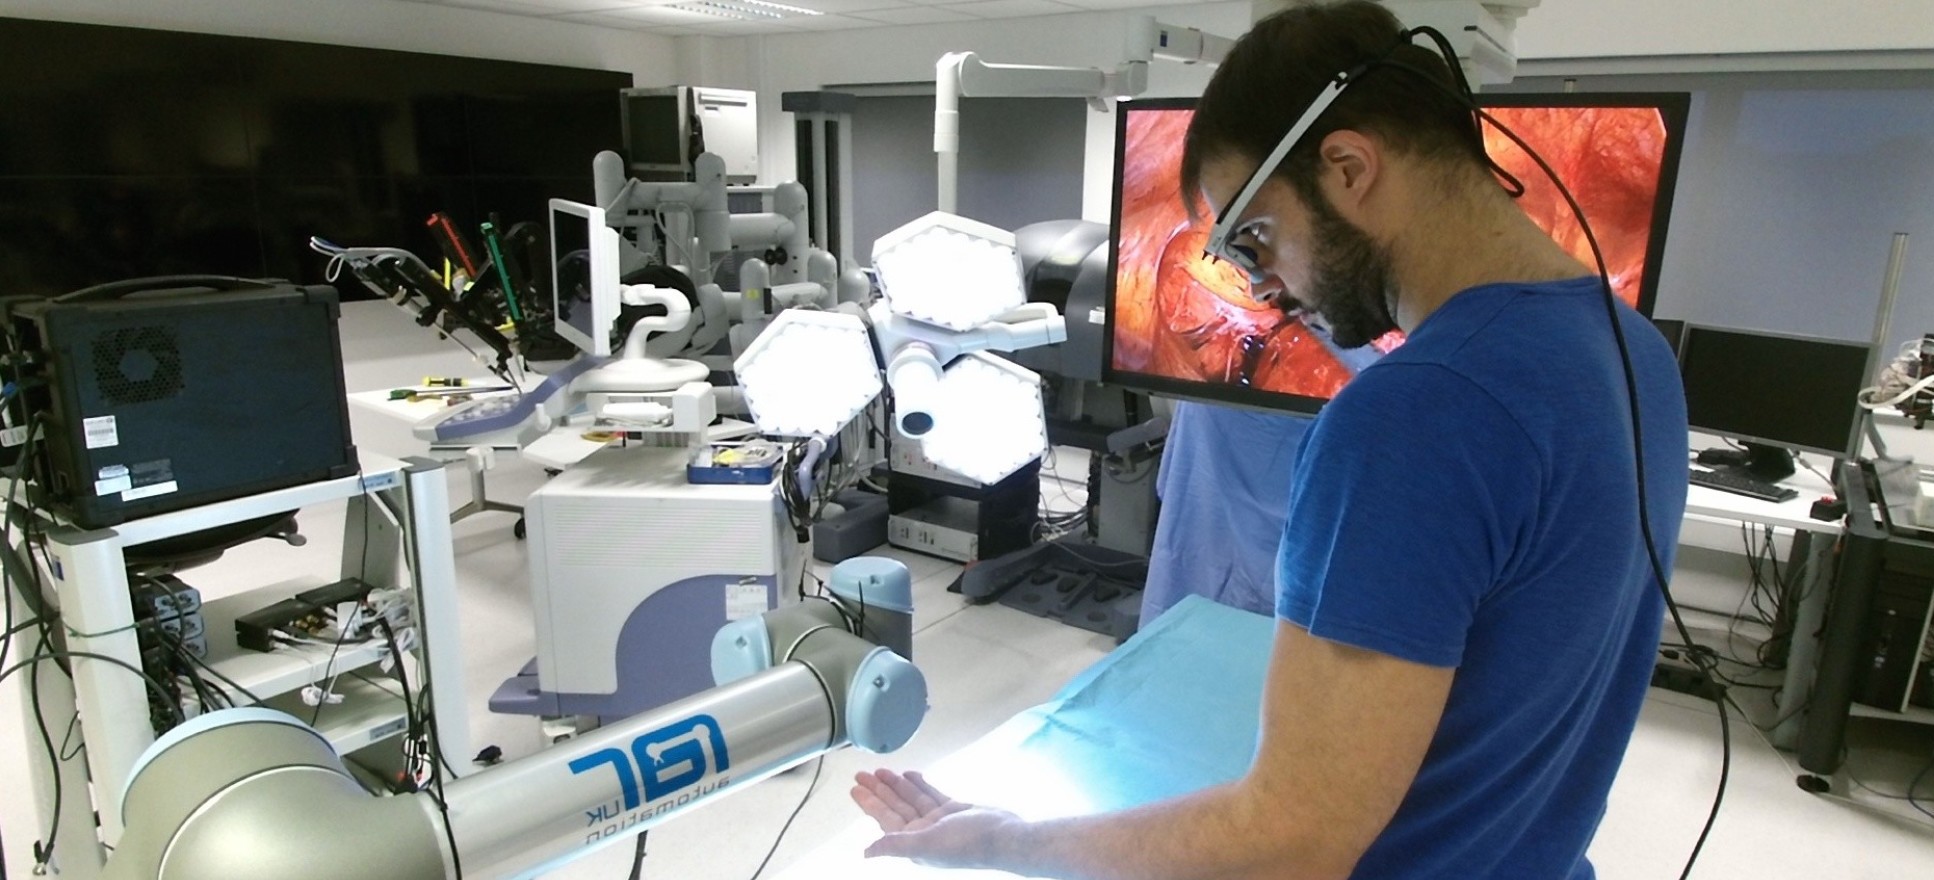 Man operating a research robot in an operating theatre